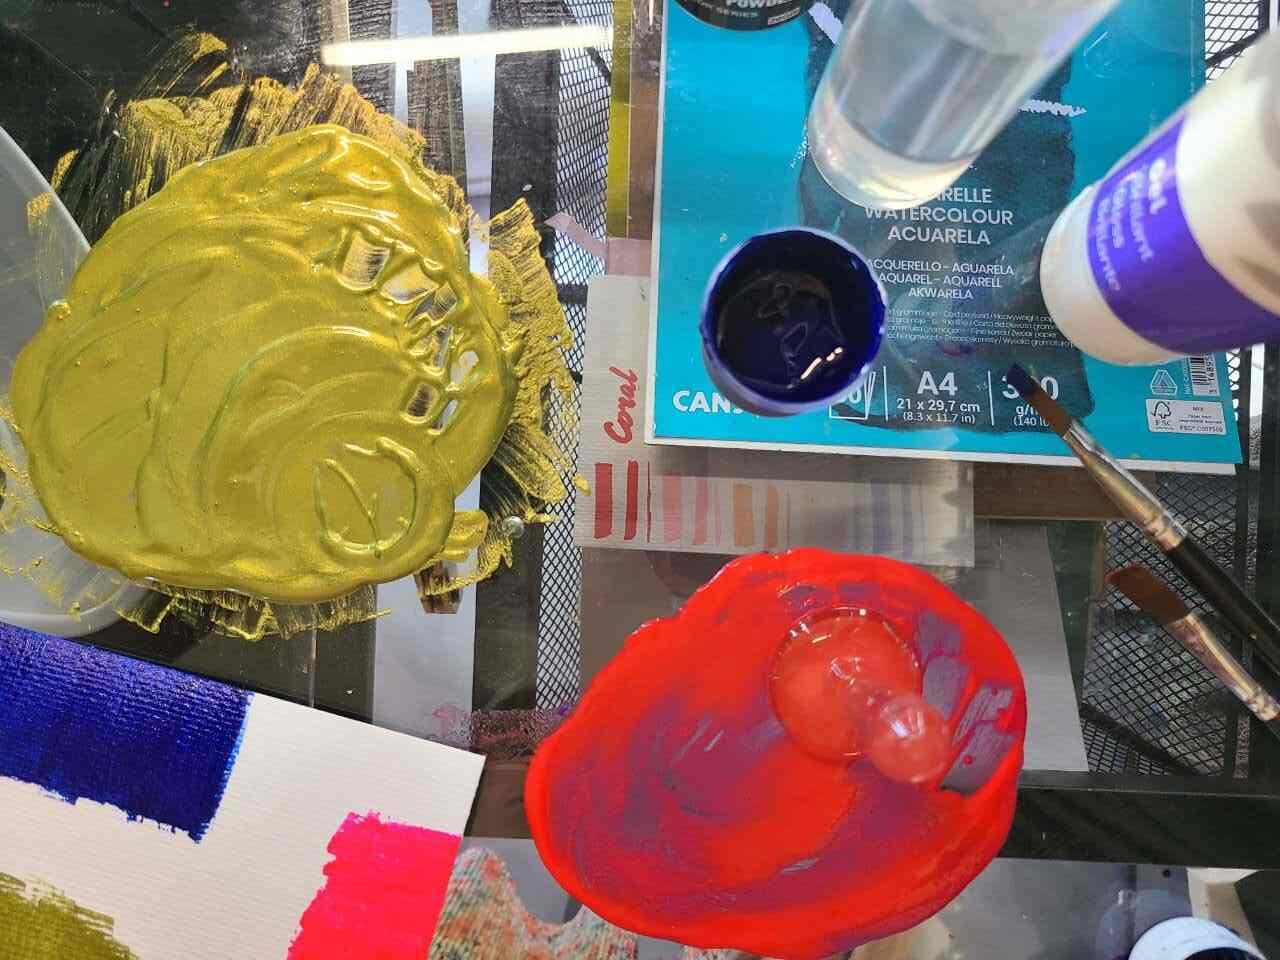 How to Make Acrylic Paint tutorial